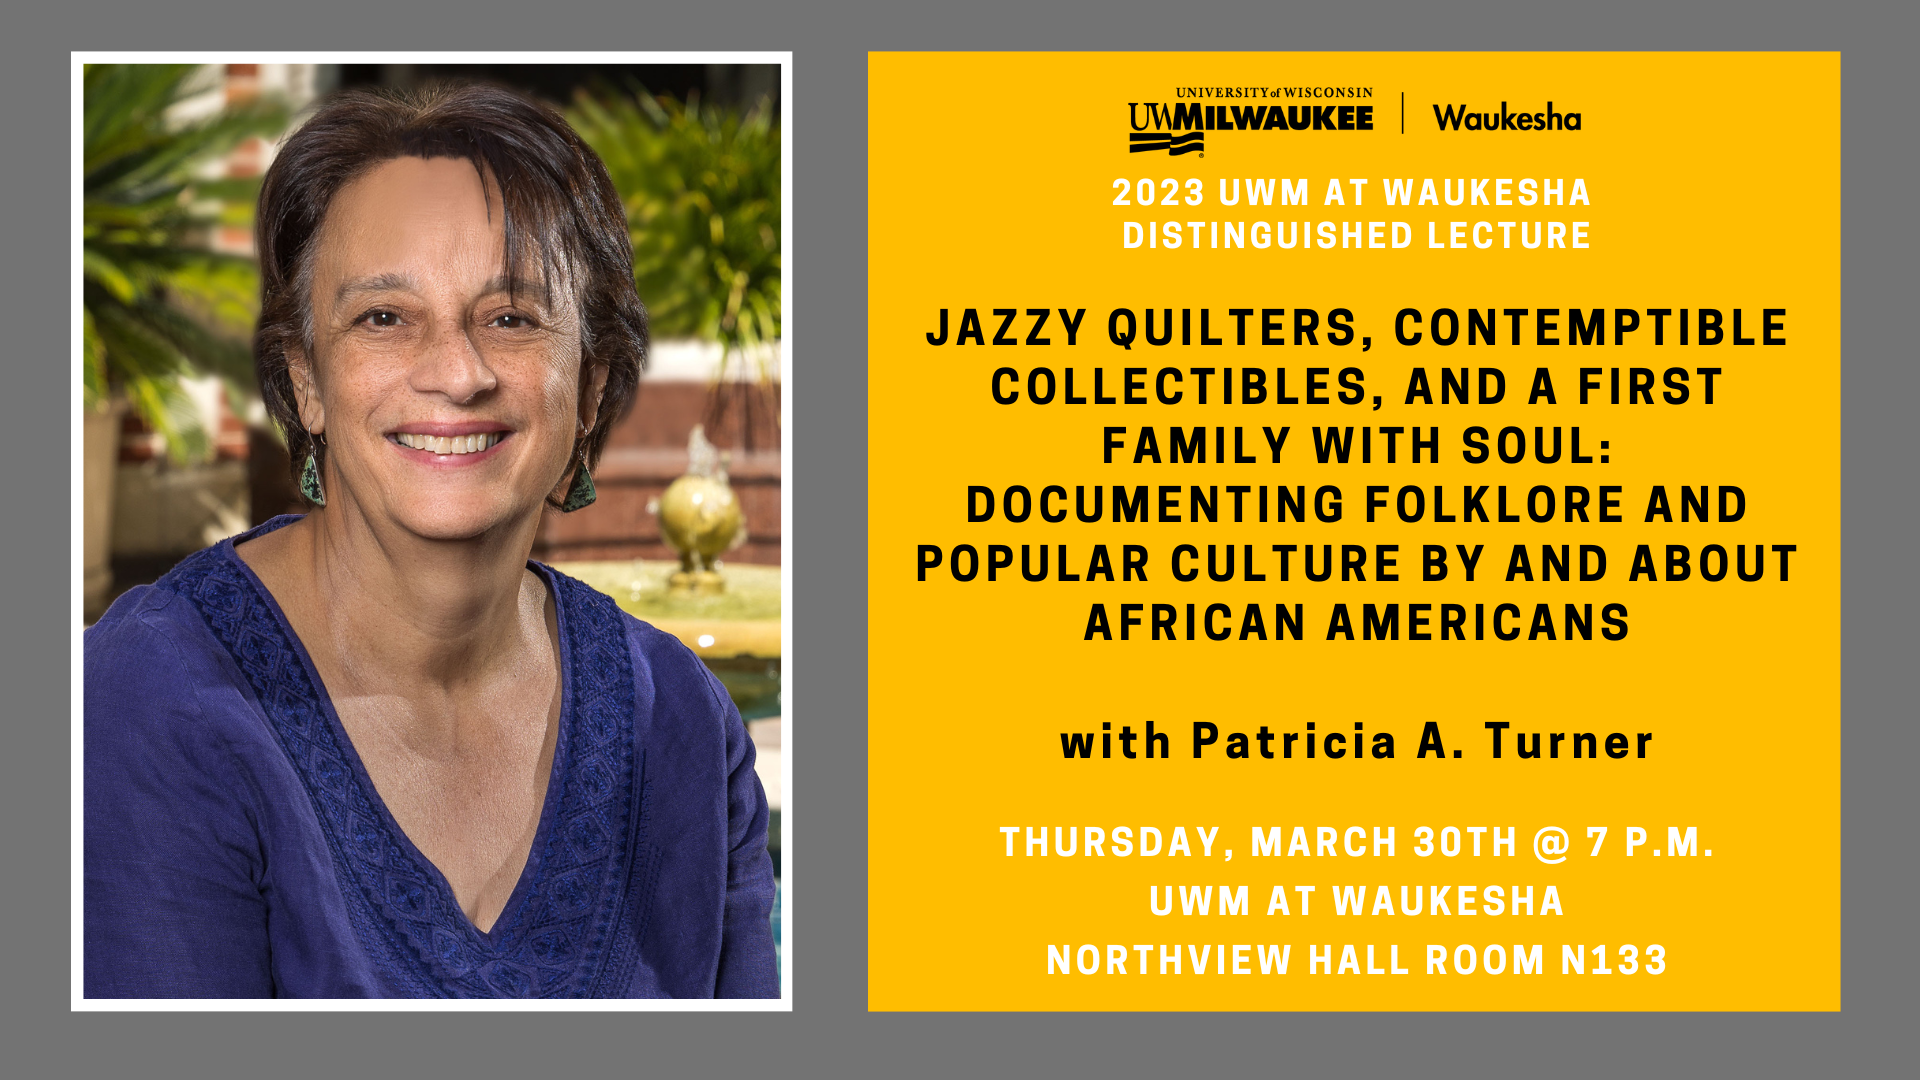 2023 Distinguished Lecture with Patricia A. Turner on March 30, 7 – 8 p.m.